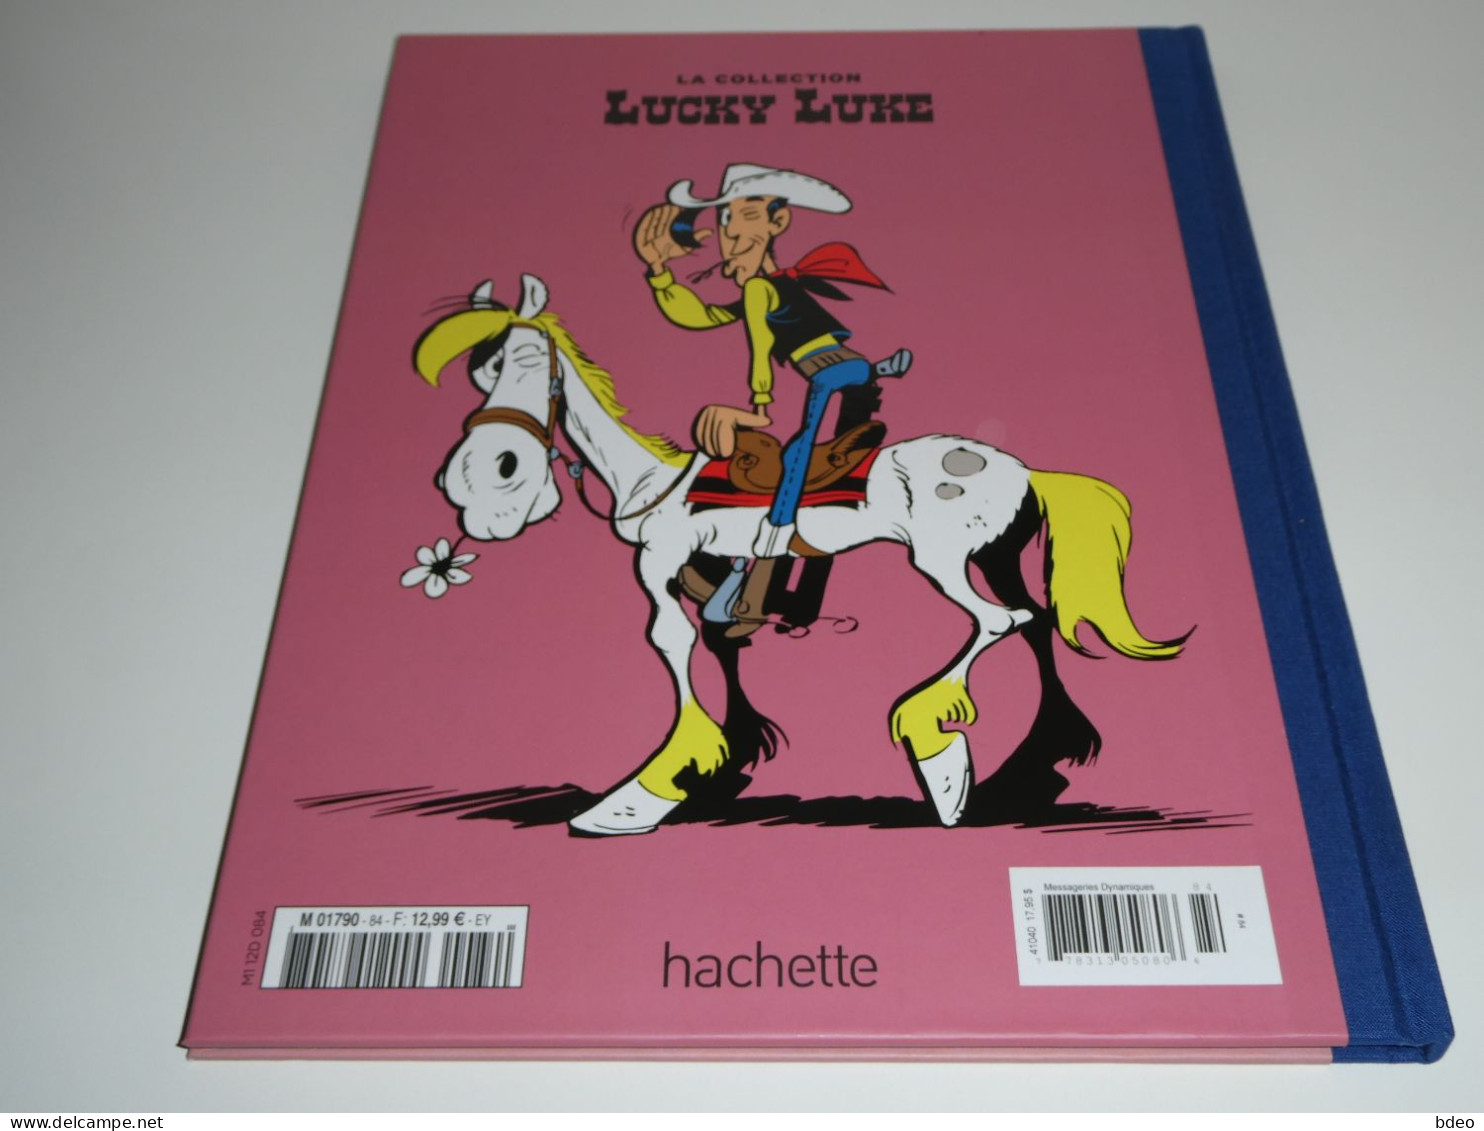 LA COLLECTION LUCKY LUKE 84 / LE MESSAGER / TBE - Original Edition - French